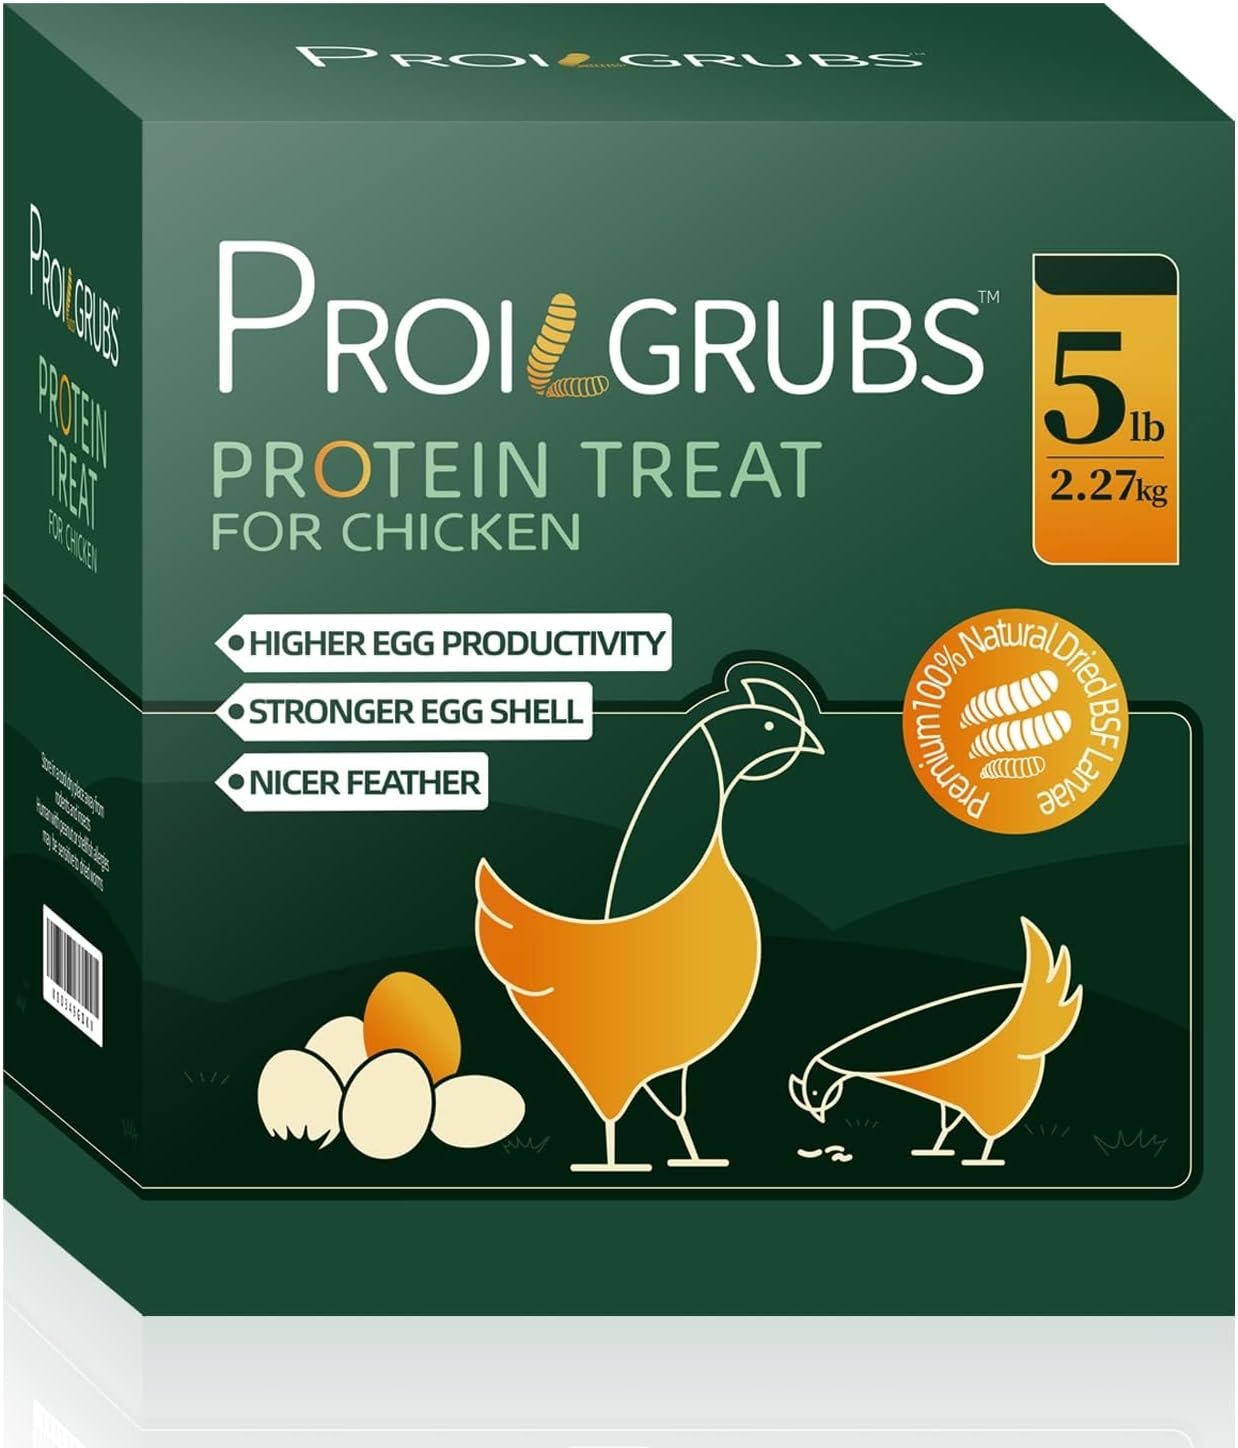 PROILGRUBS 5 LBS - Non-GMO-Dried Grubs for Chickens - 85X More Calcium Than Mealworms - All Natural Dried Black Soldier Fly Larvae Treats, Dried Meal Worms for Chickens, Hens, Birds